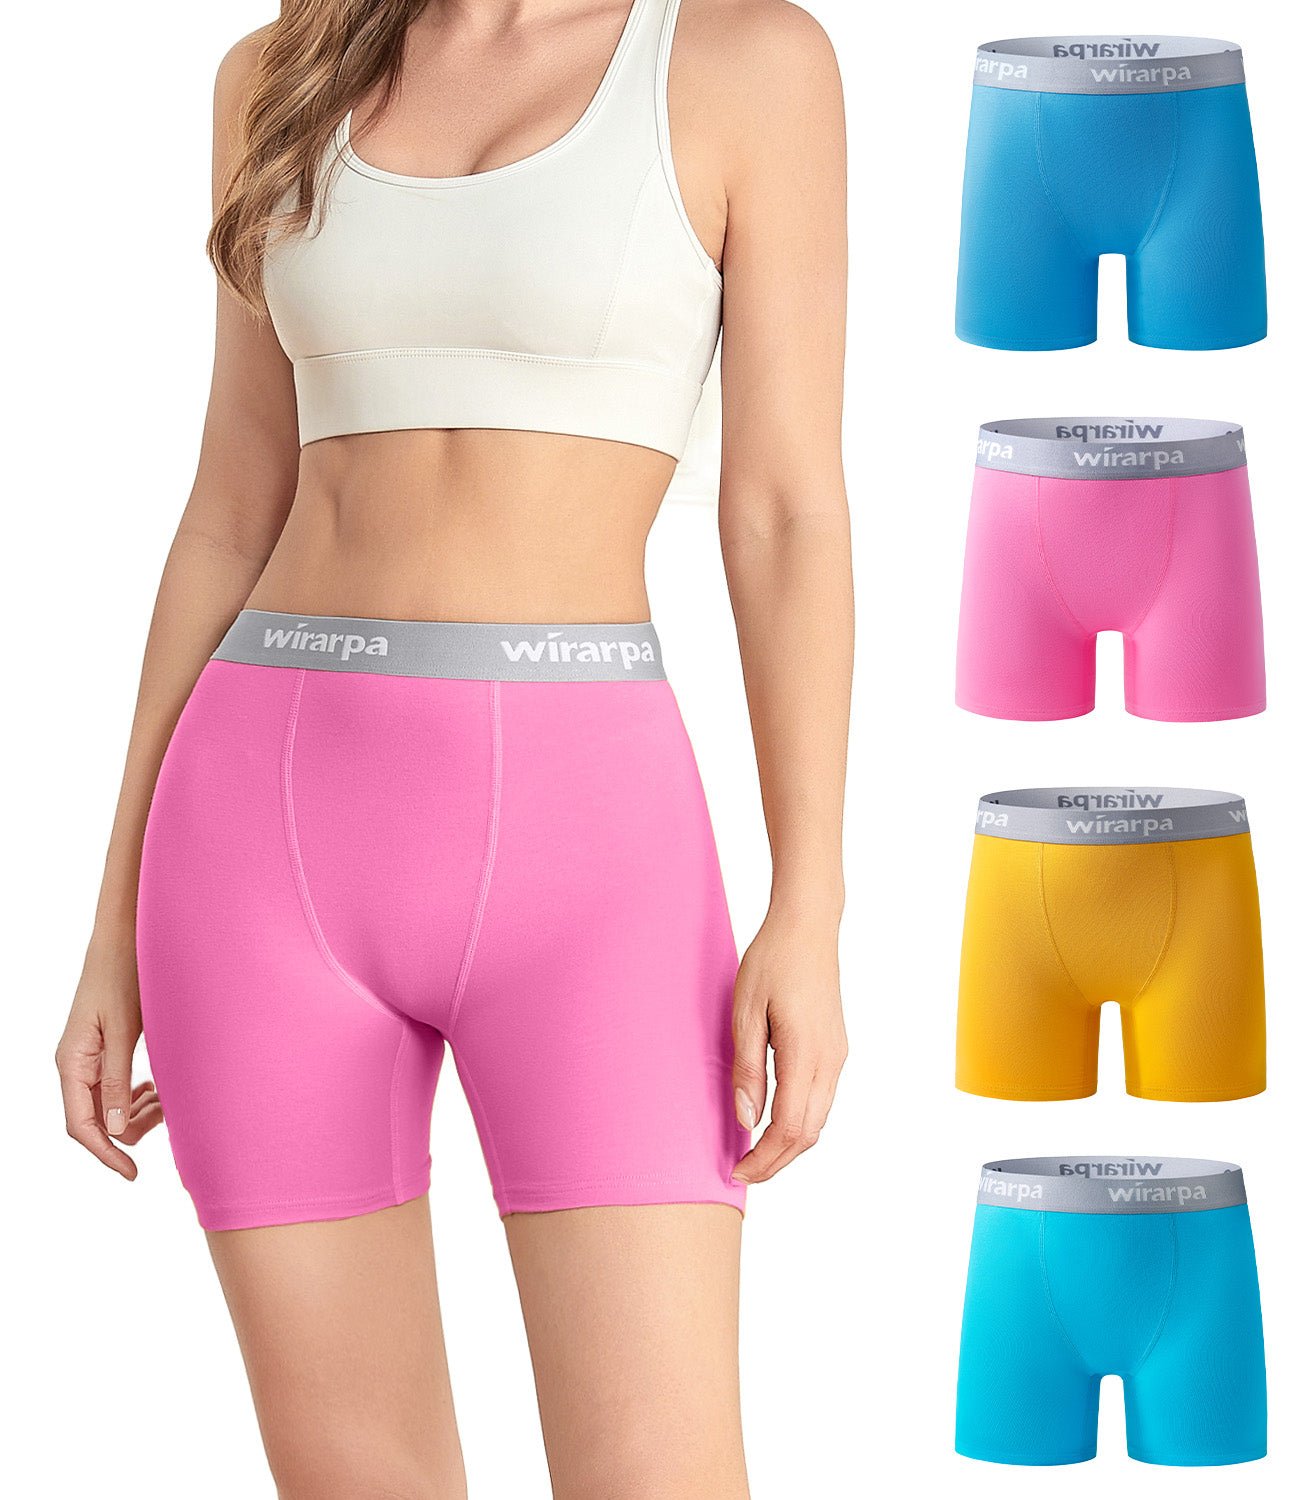 Qcmgmg Boy Shorts Underwear for Women High Waisted Seamless Anti Chafing  Panties for Women Pack Camel M 